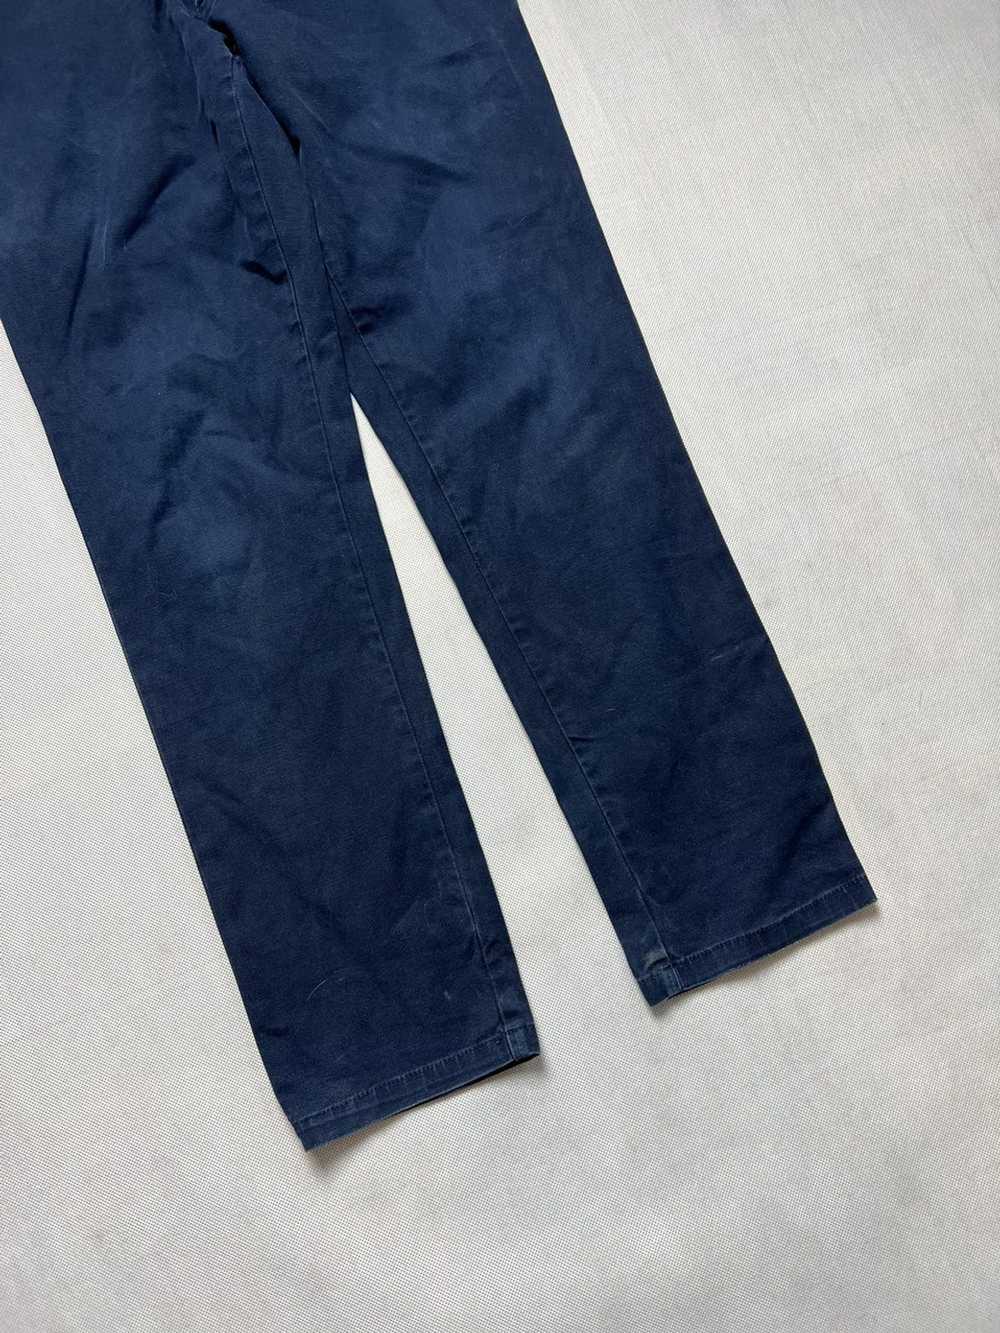 Carhartt Trousers pants Carhartt Washed - image 2